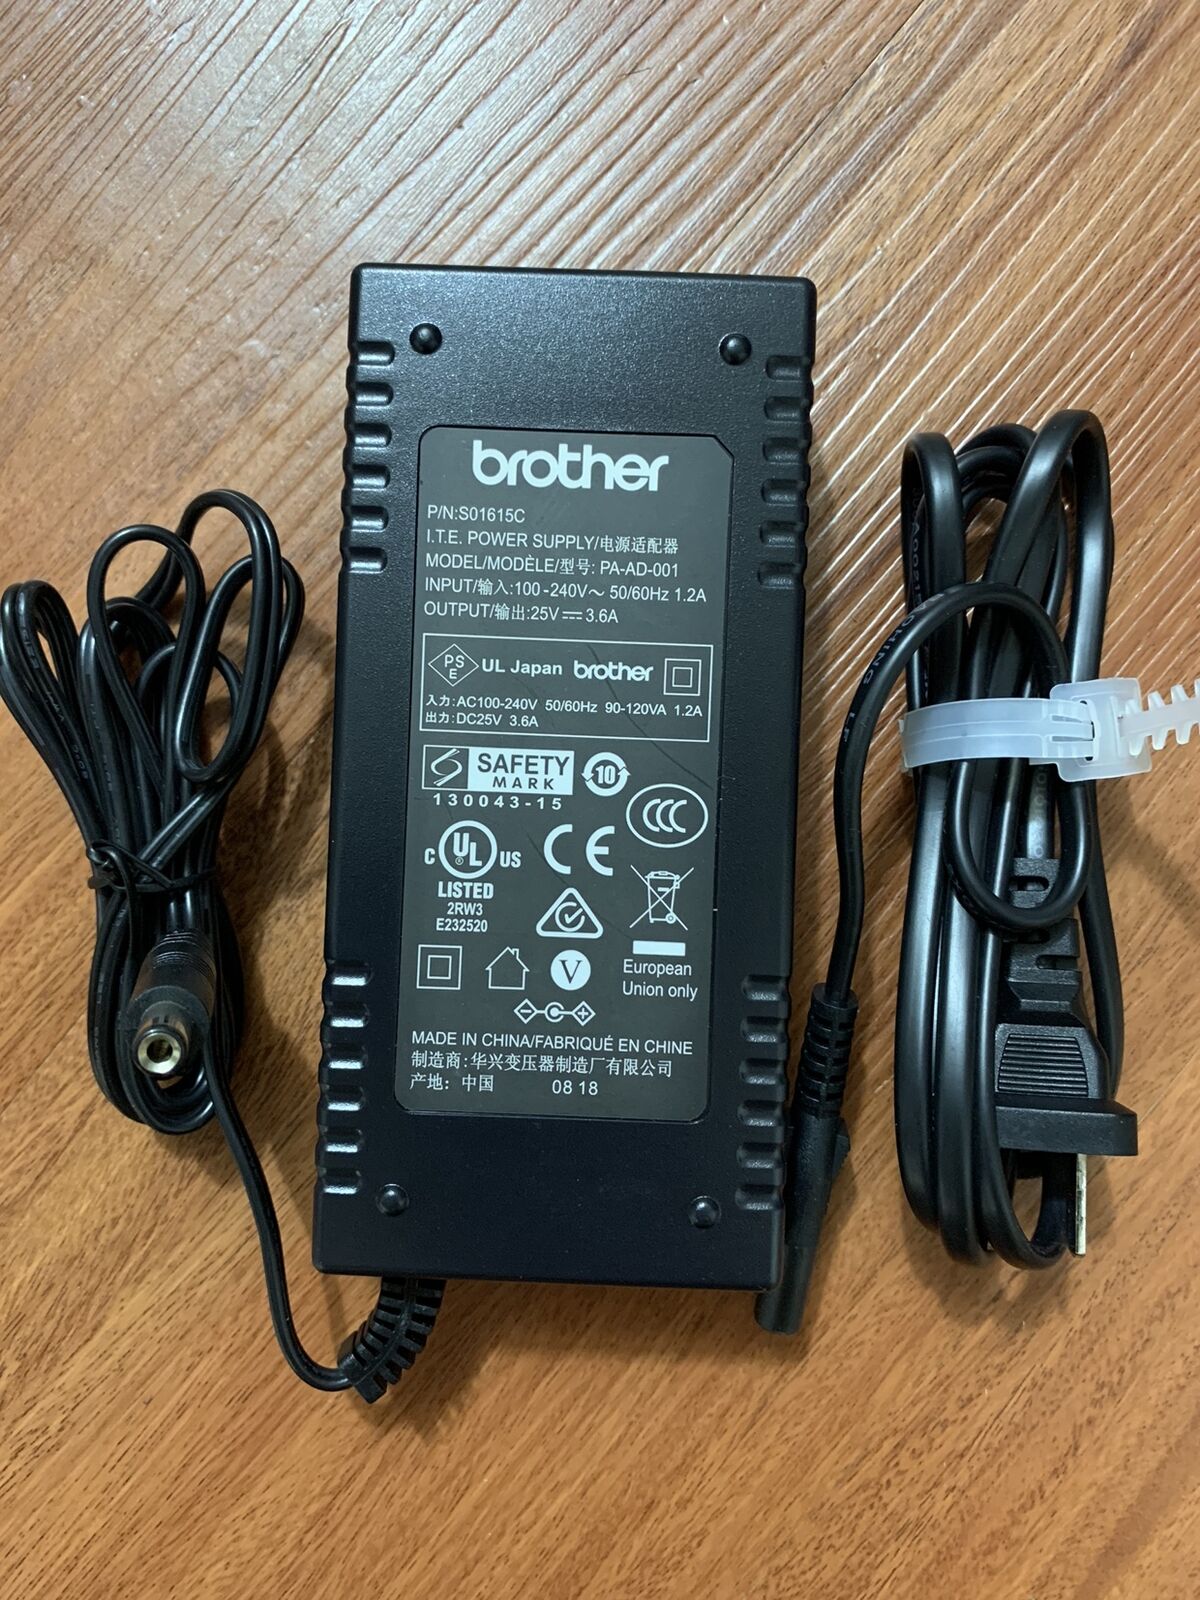 *Brand NEW*Genuine Brother AC Adapter for Brother PA-AD-001 Label Printer Power Charger